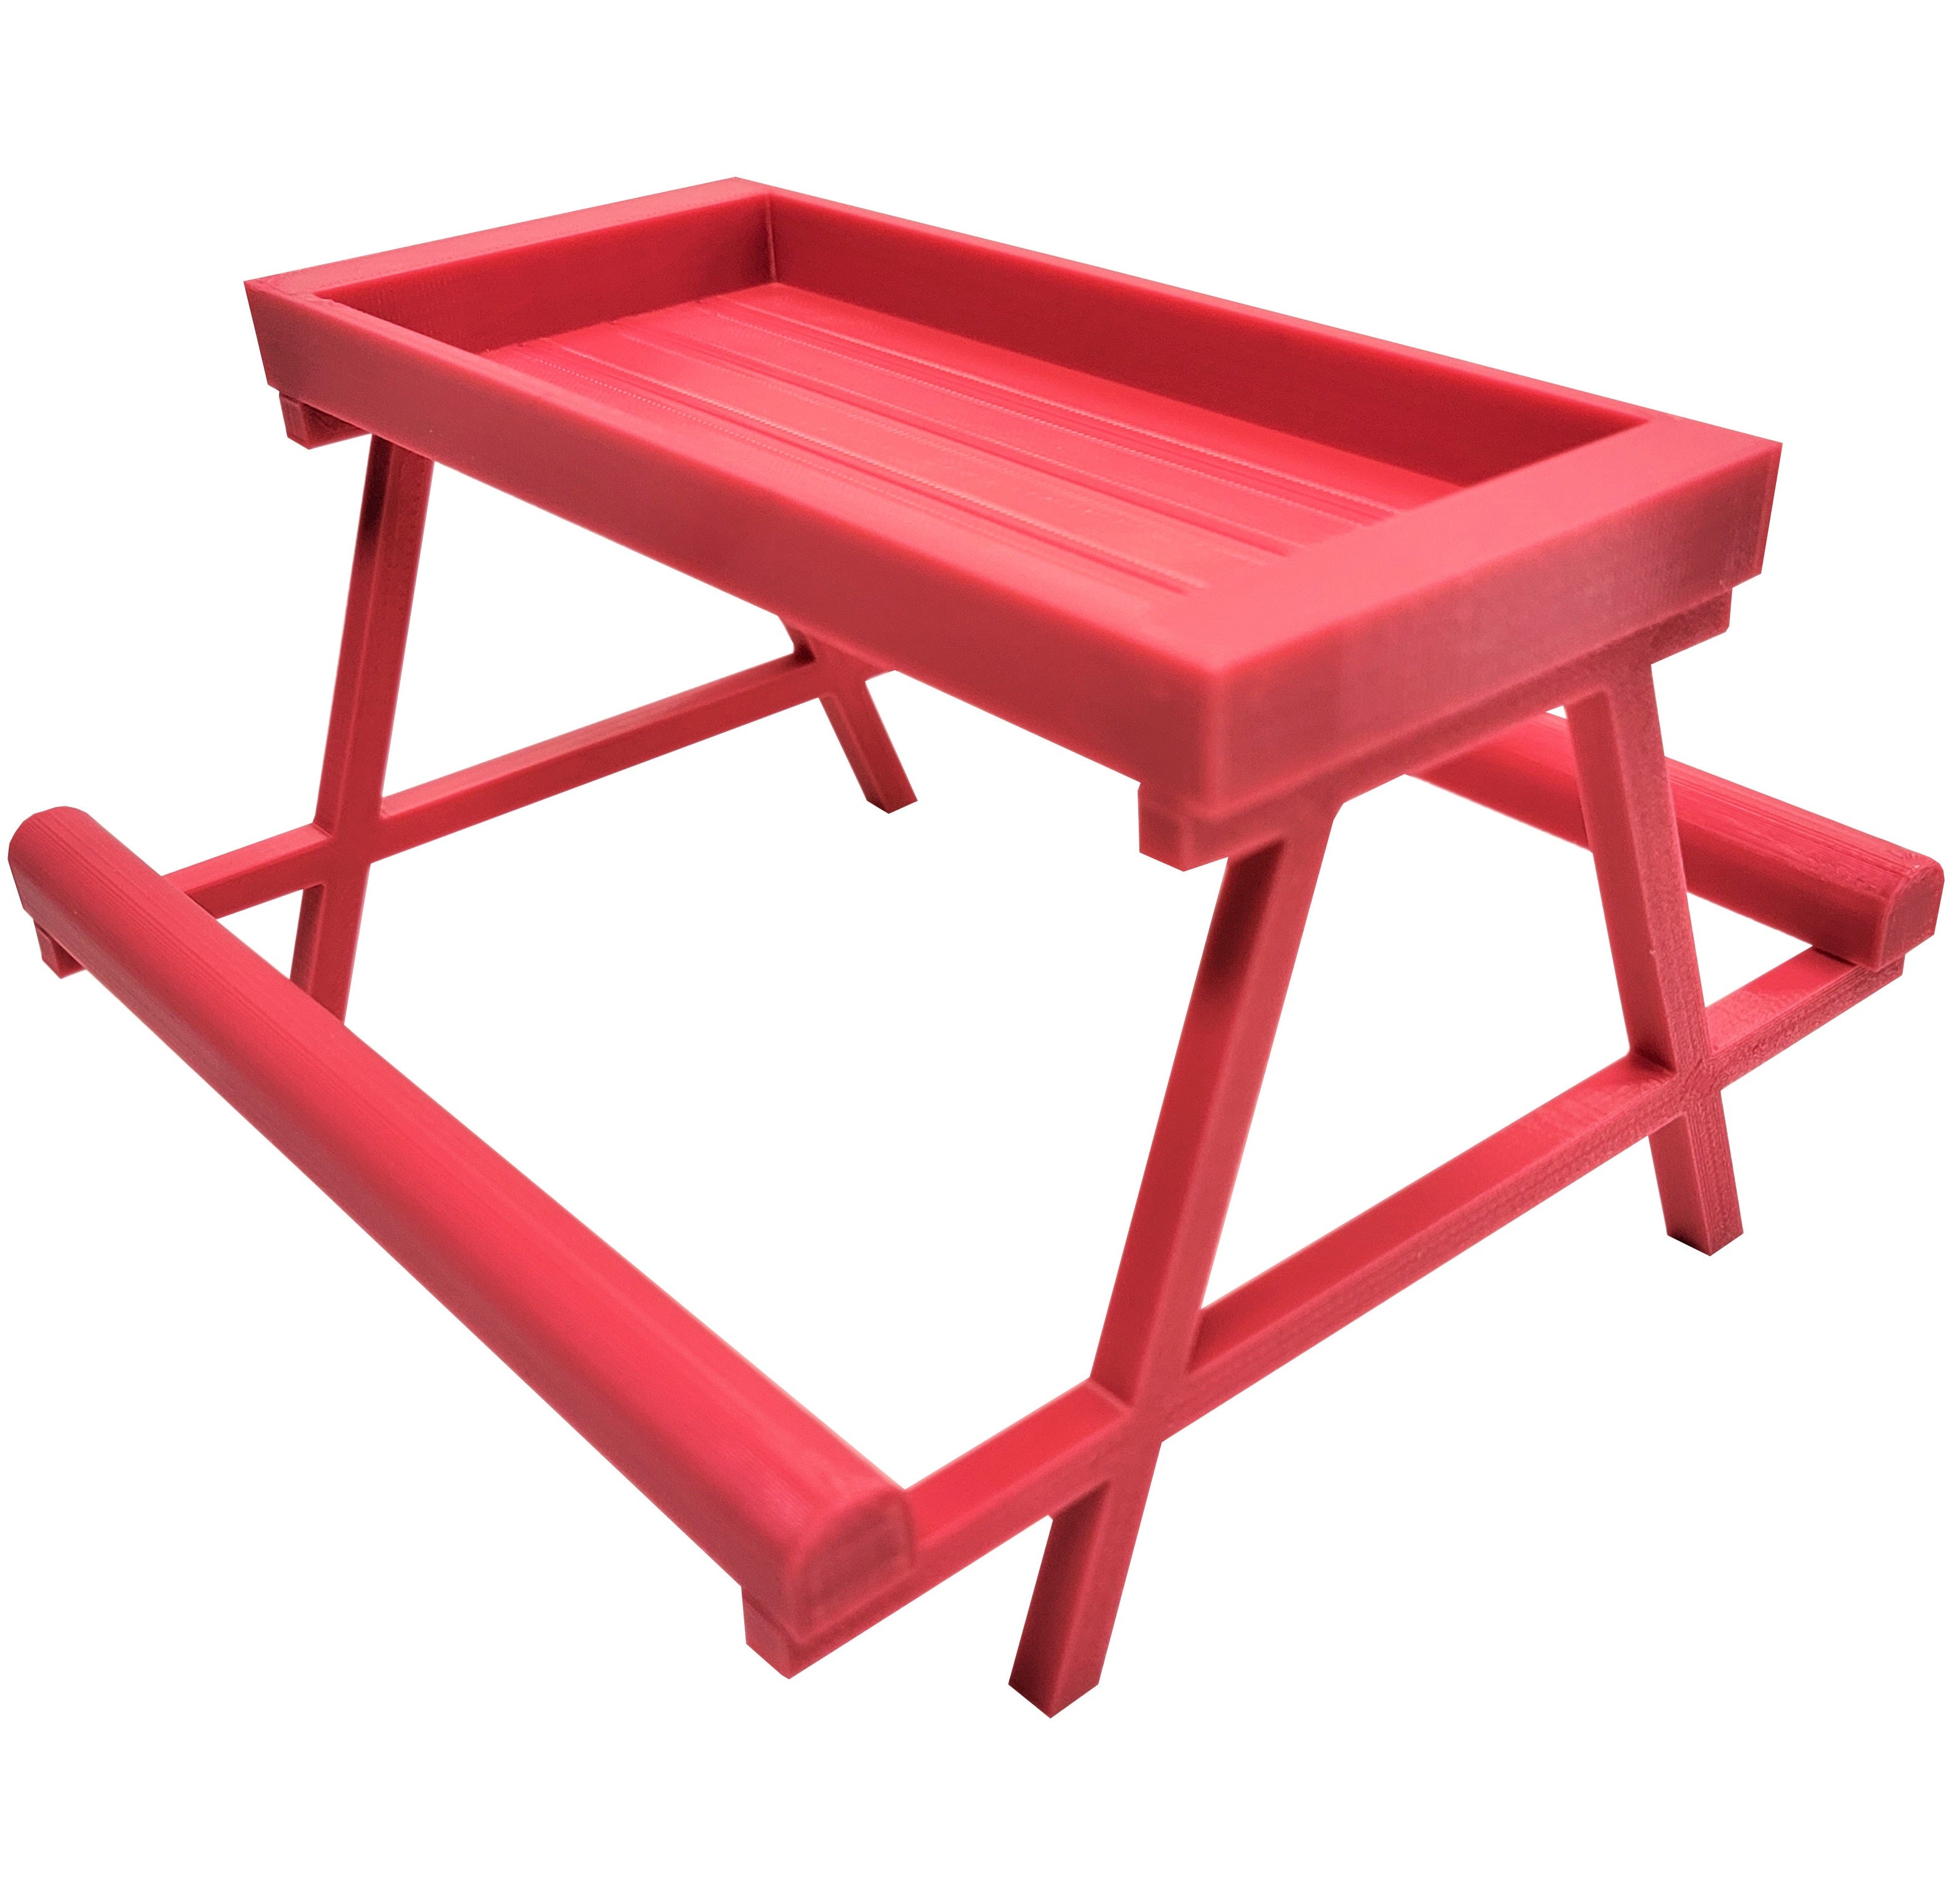 7 Inch Long Pink Chick Picnic Table Chicknic Treat Feeder Bench